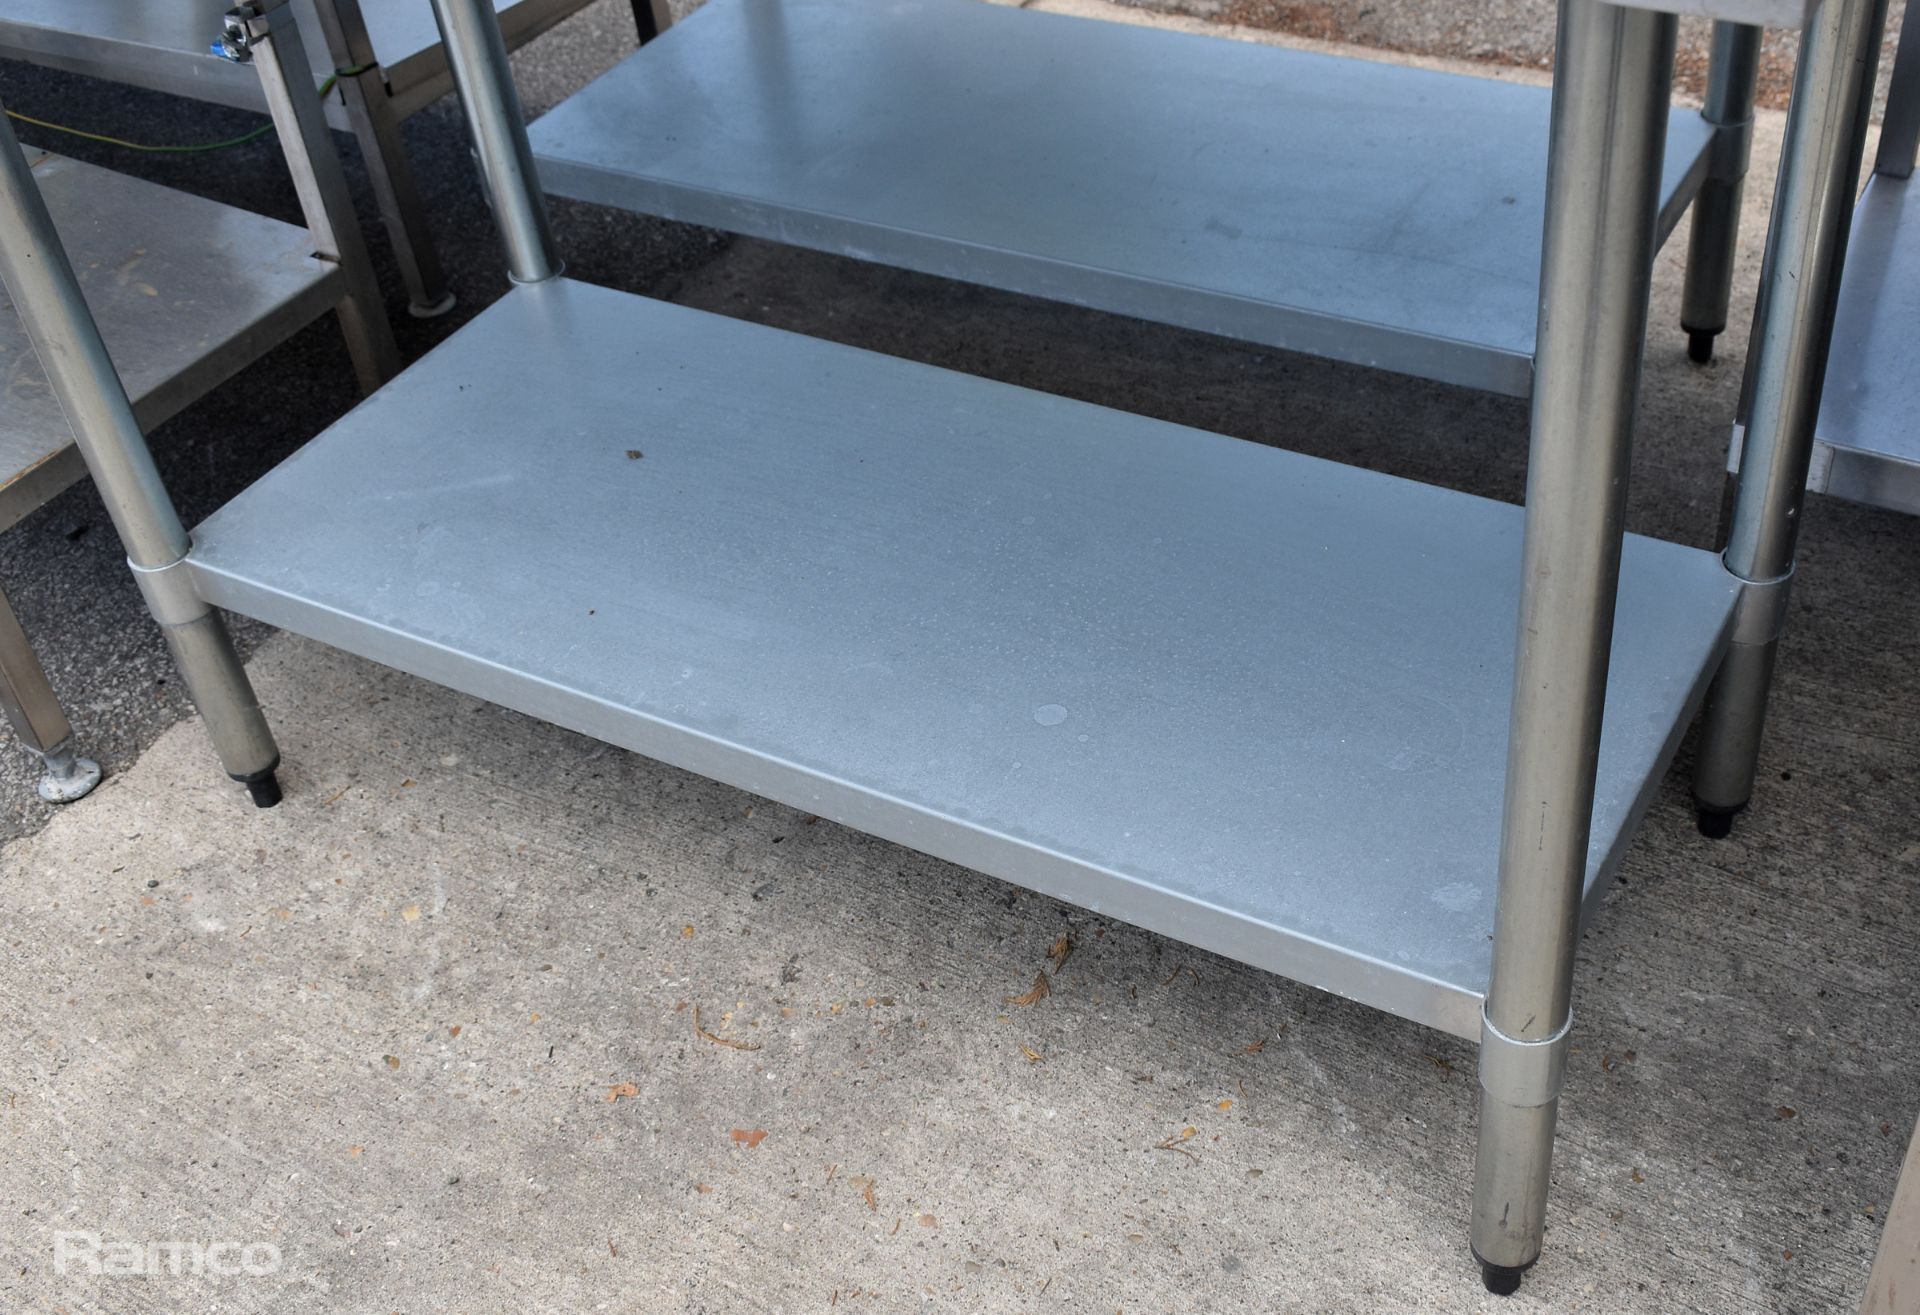 Vogue stainless steel prep table with lower shelf - W 1200 x D 600 x H 900mm - Image 2 of 3